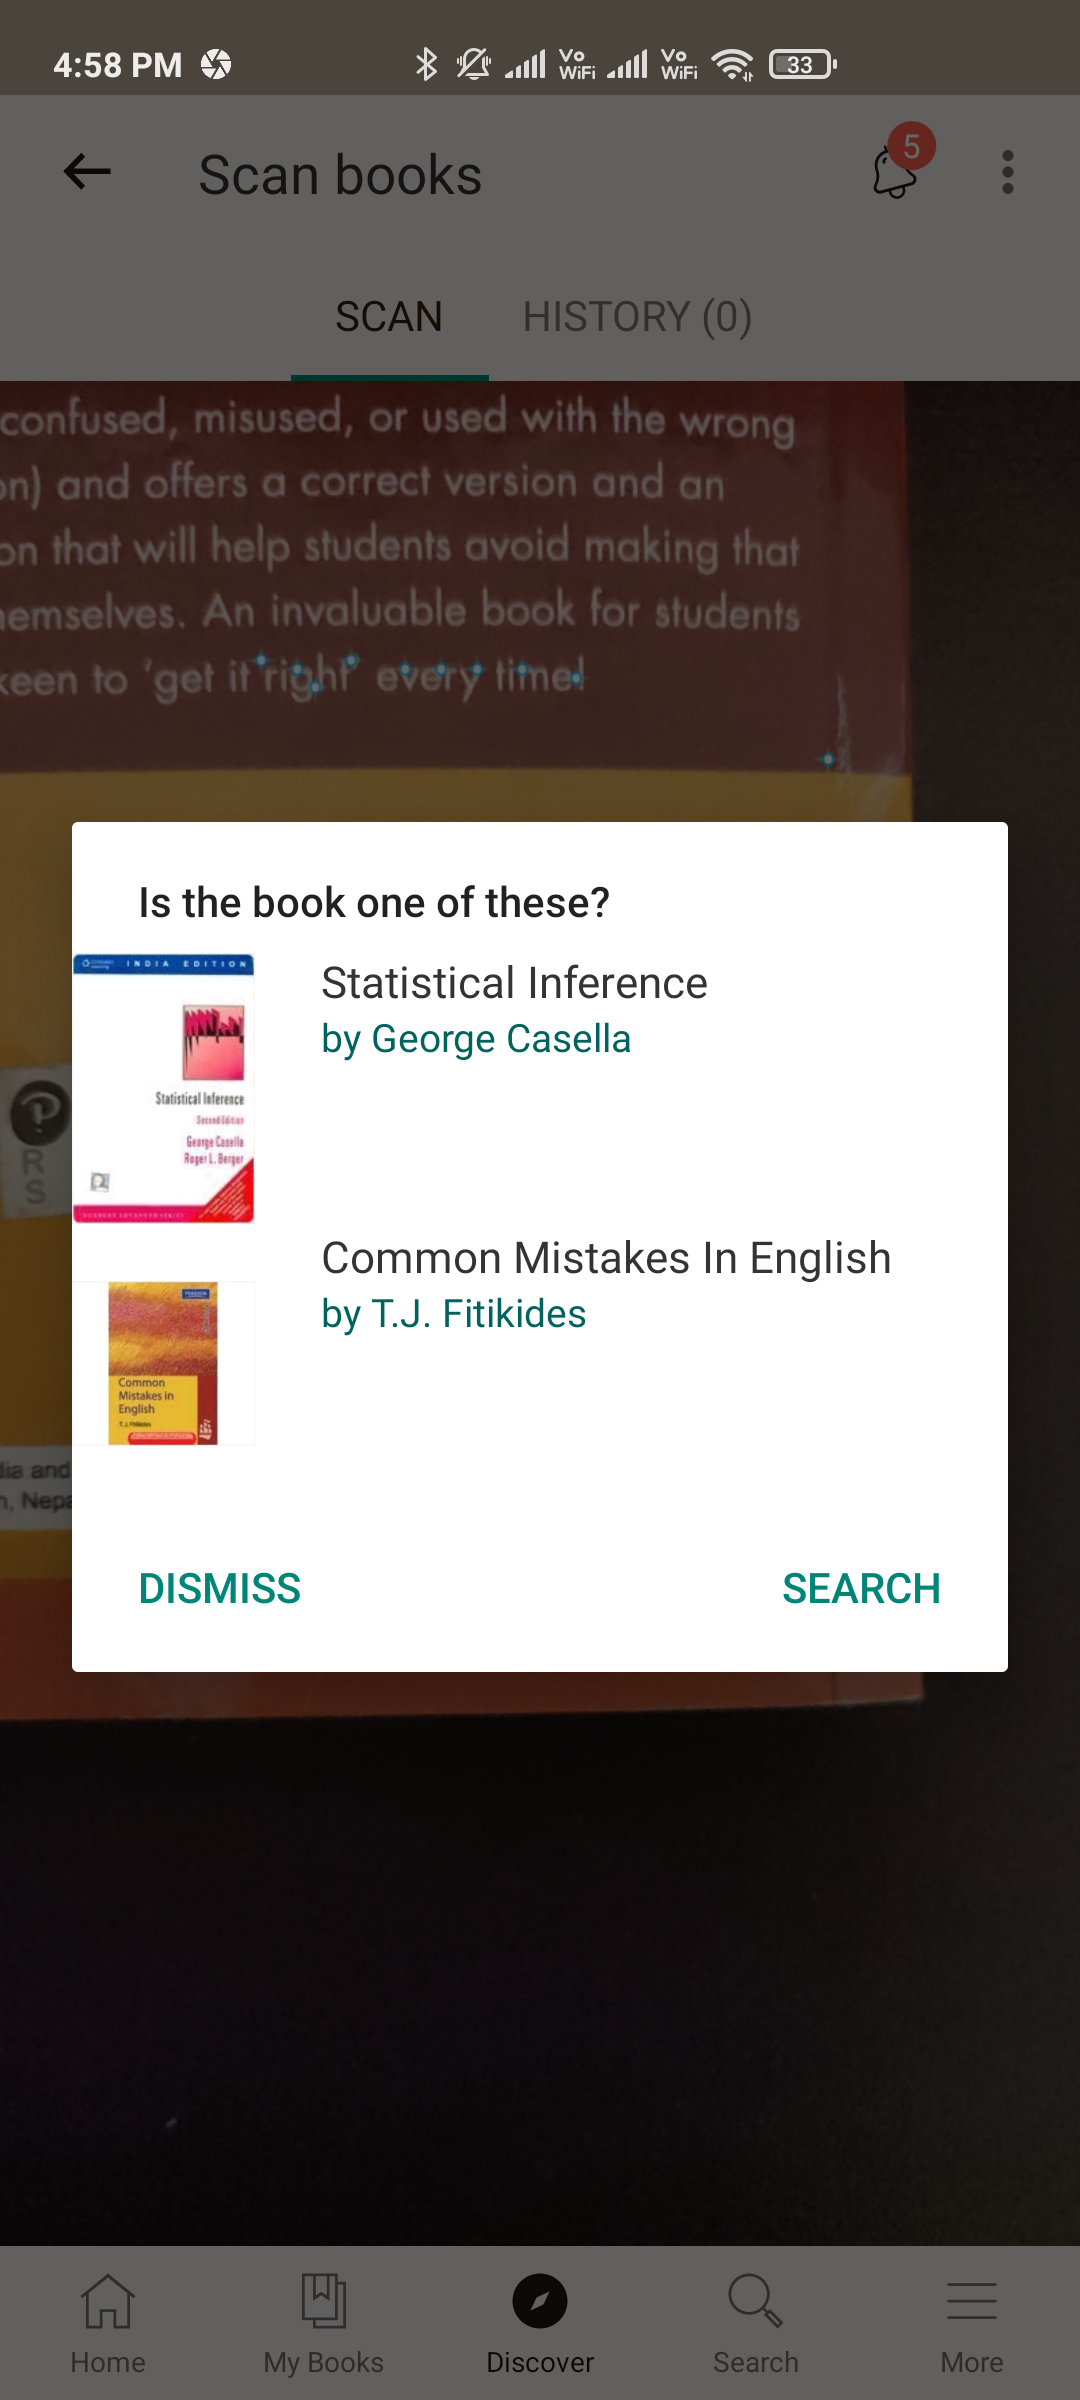 Choosing the correct book in Goodreads